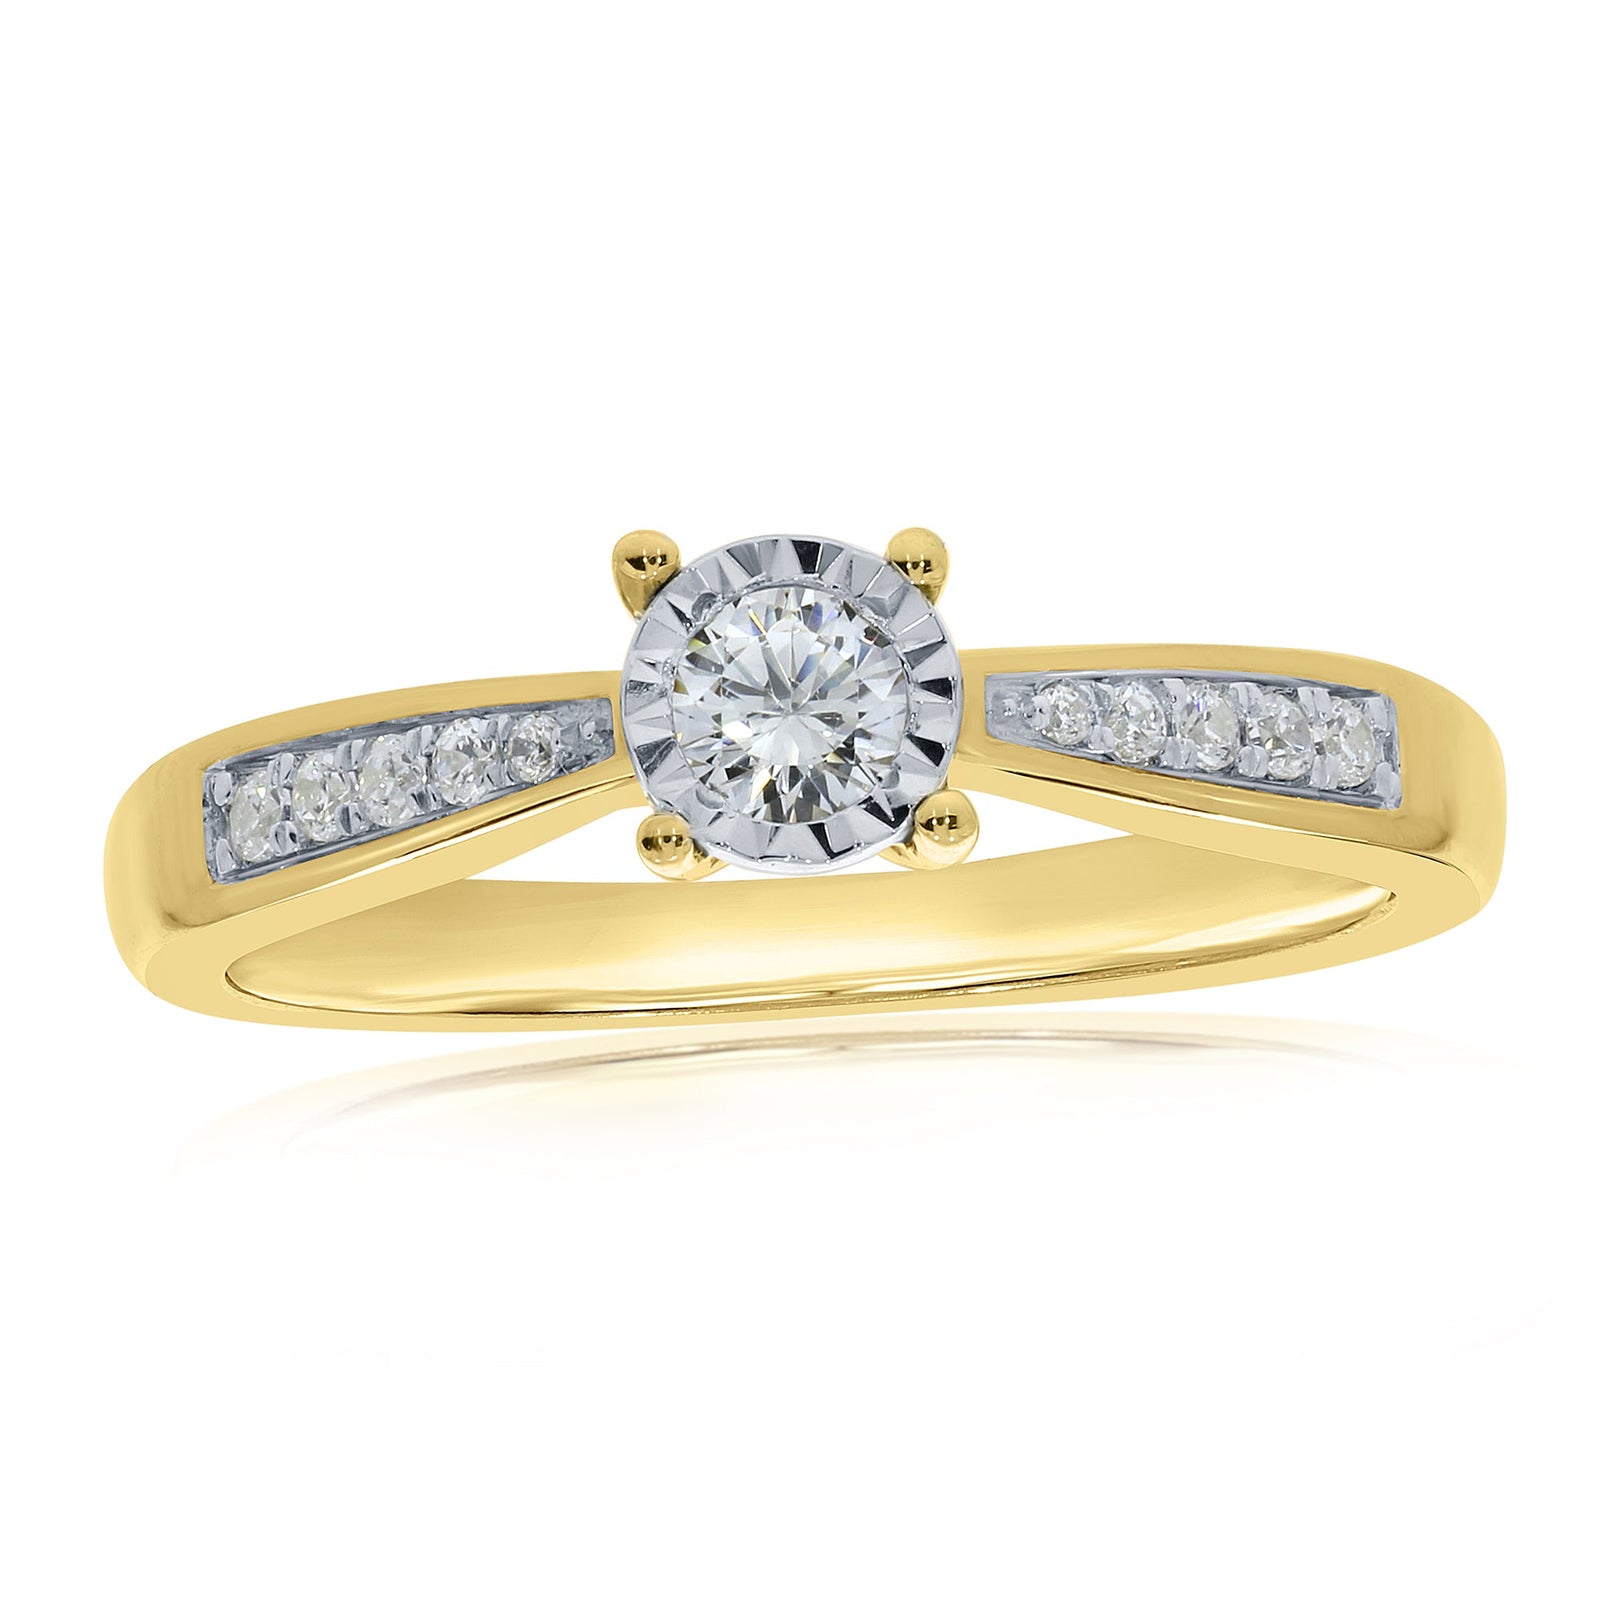 9ct gold single stone miracle plate diamond ring with diamond set shoulders 0.26ct